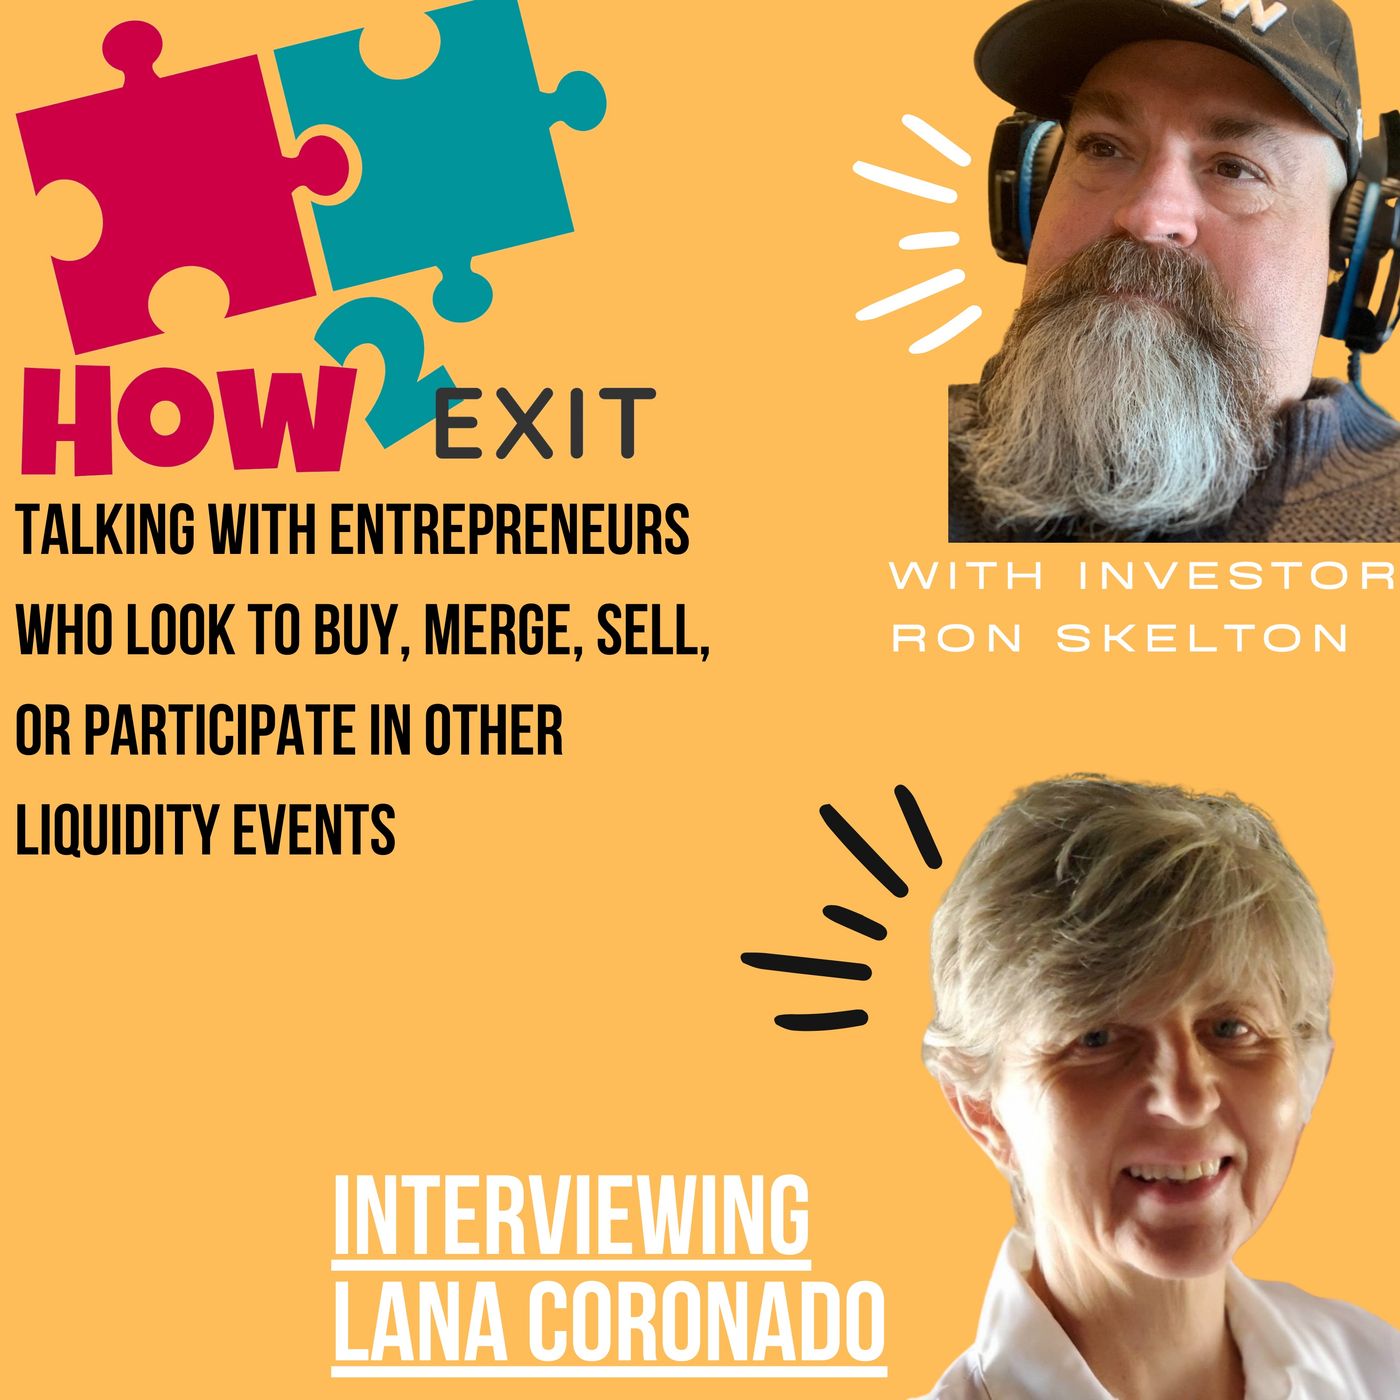 How2Exit Episode 1: Lana Coronado - Author and Chair for MBH who have acquired 25 companies in less than 2 years. Image